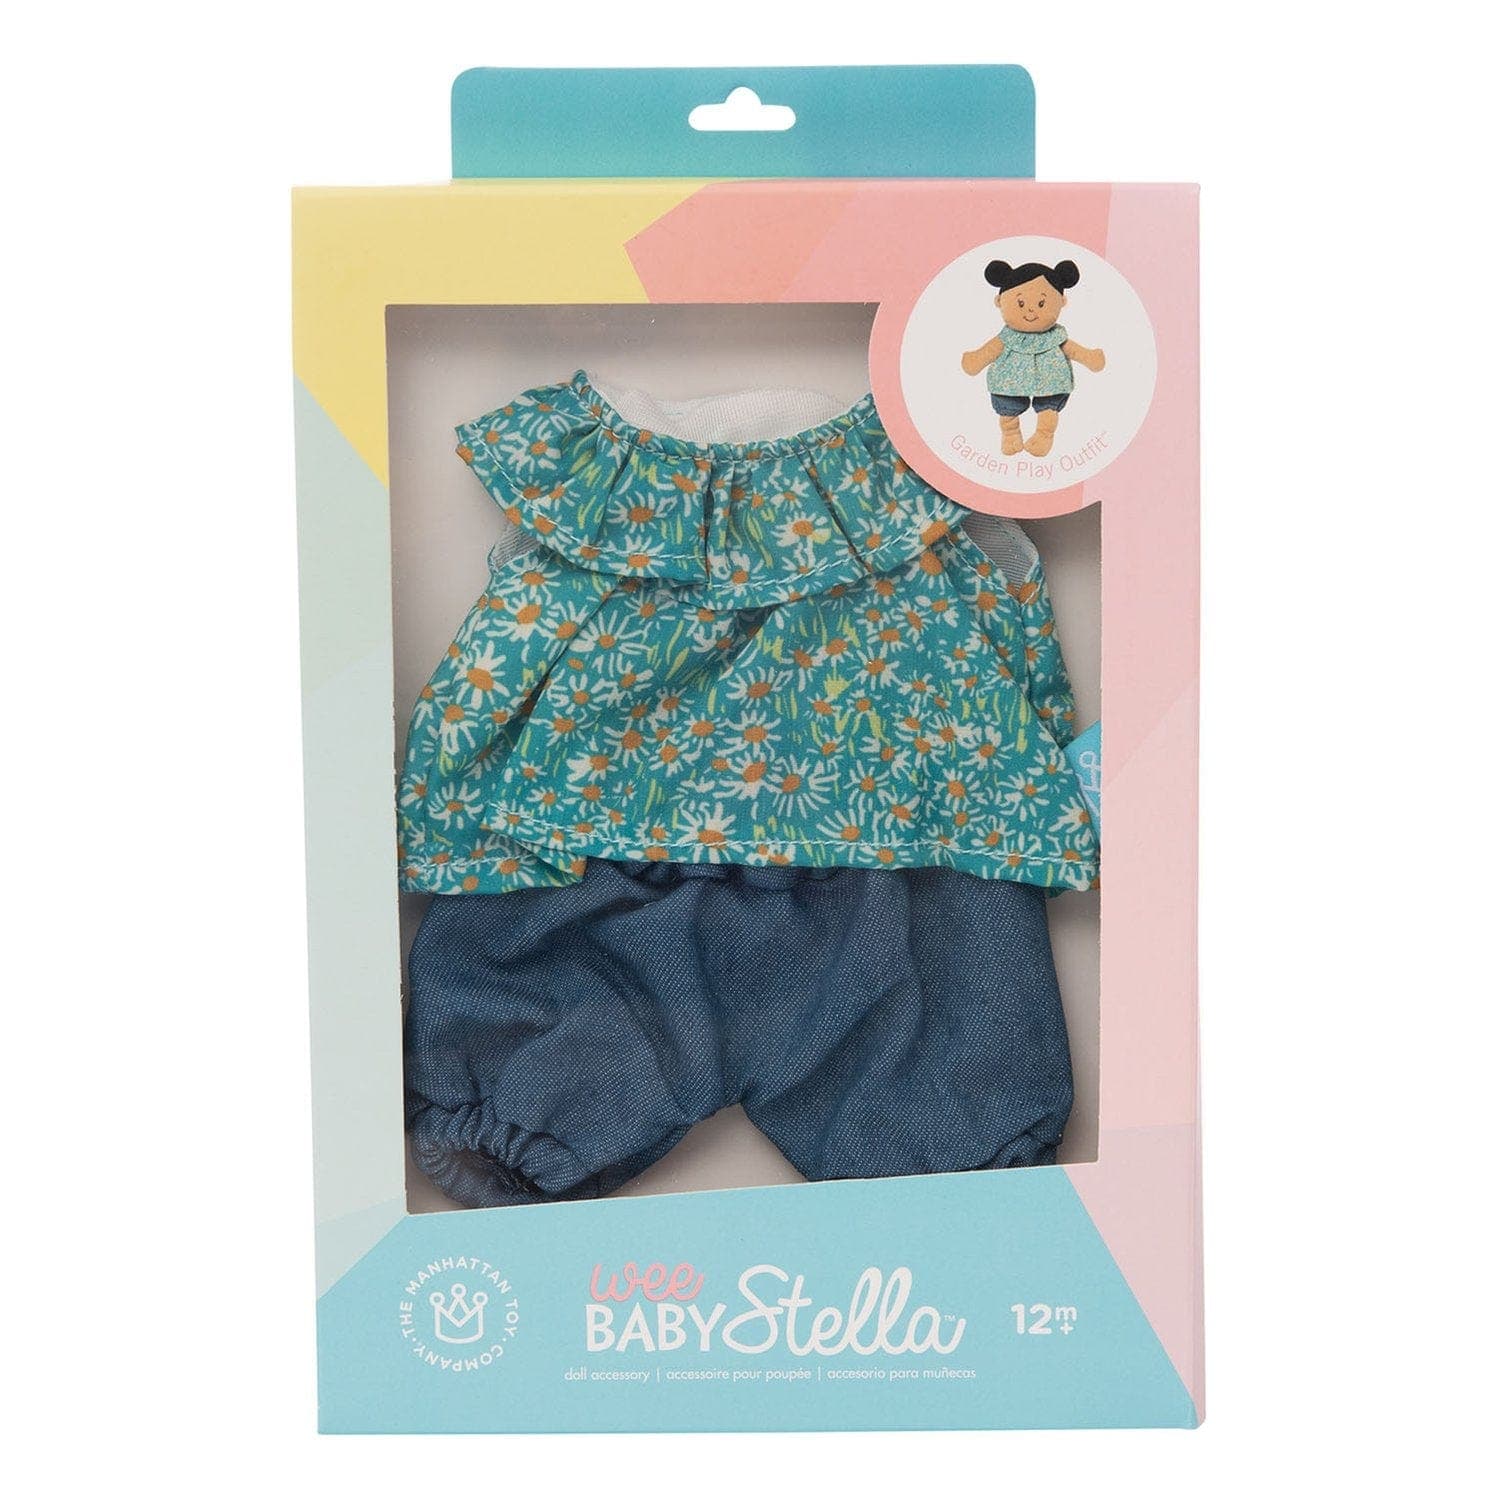 Manhattan Toy-Wee Baby Stella Garden Play Outfit-159040-XS For Doll-Legacy Toys